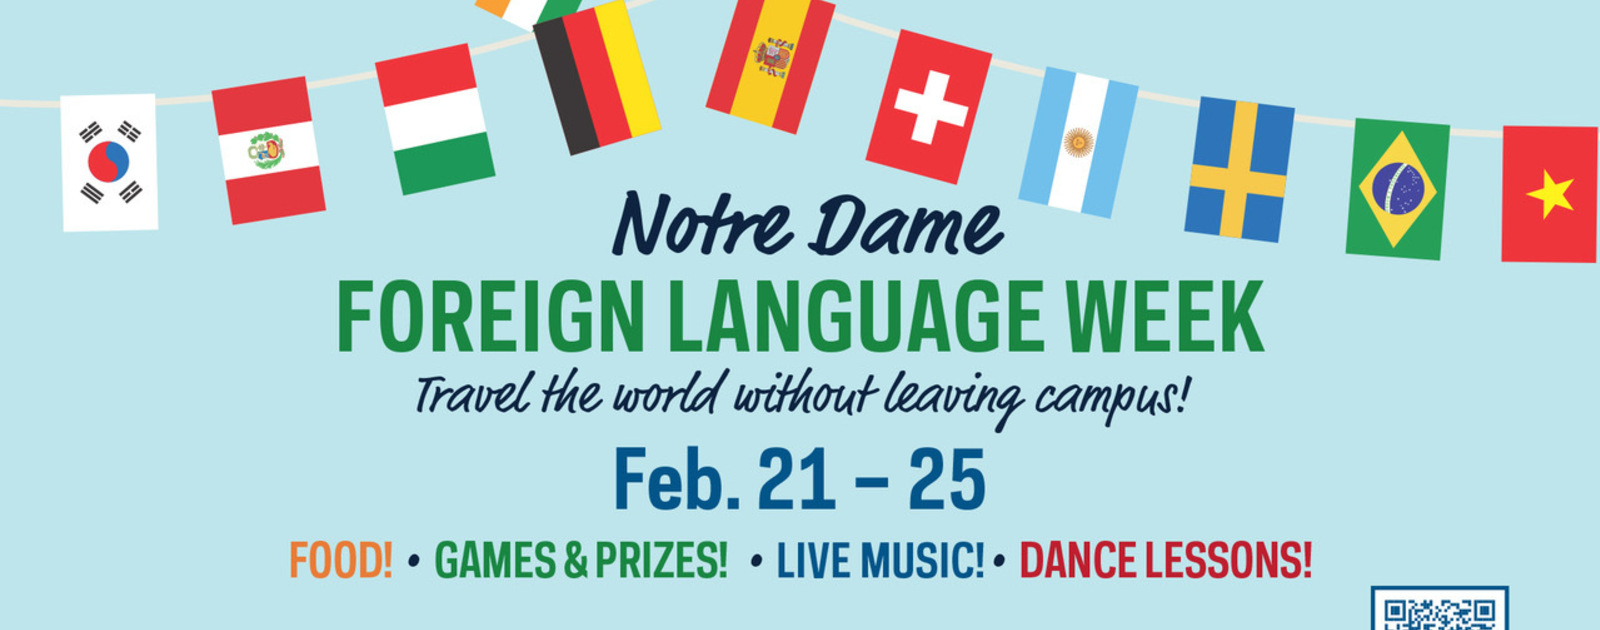 Foreign Language Week Takes Students Around the World in 5 Days News